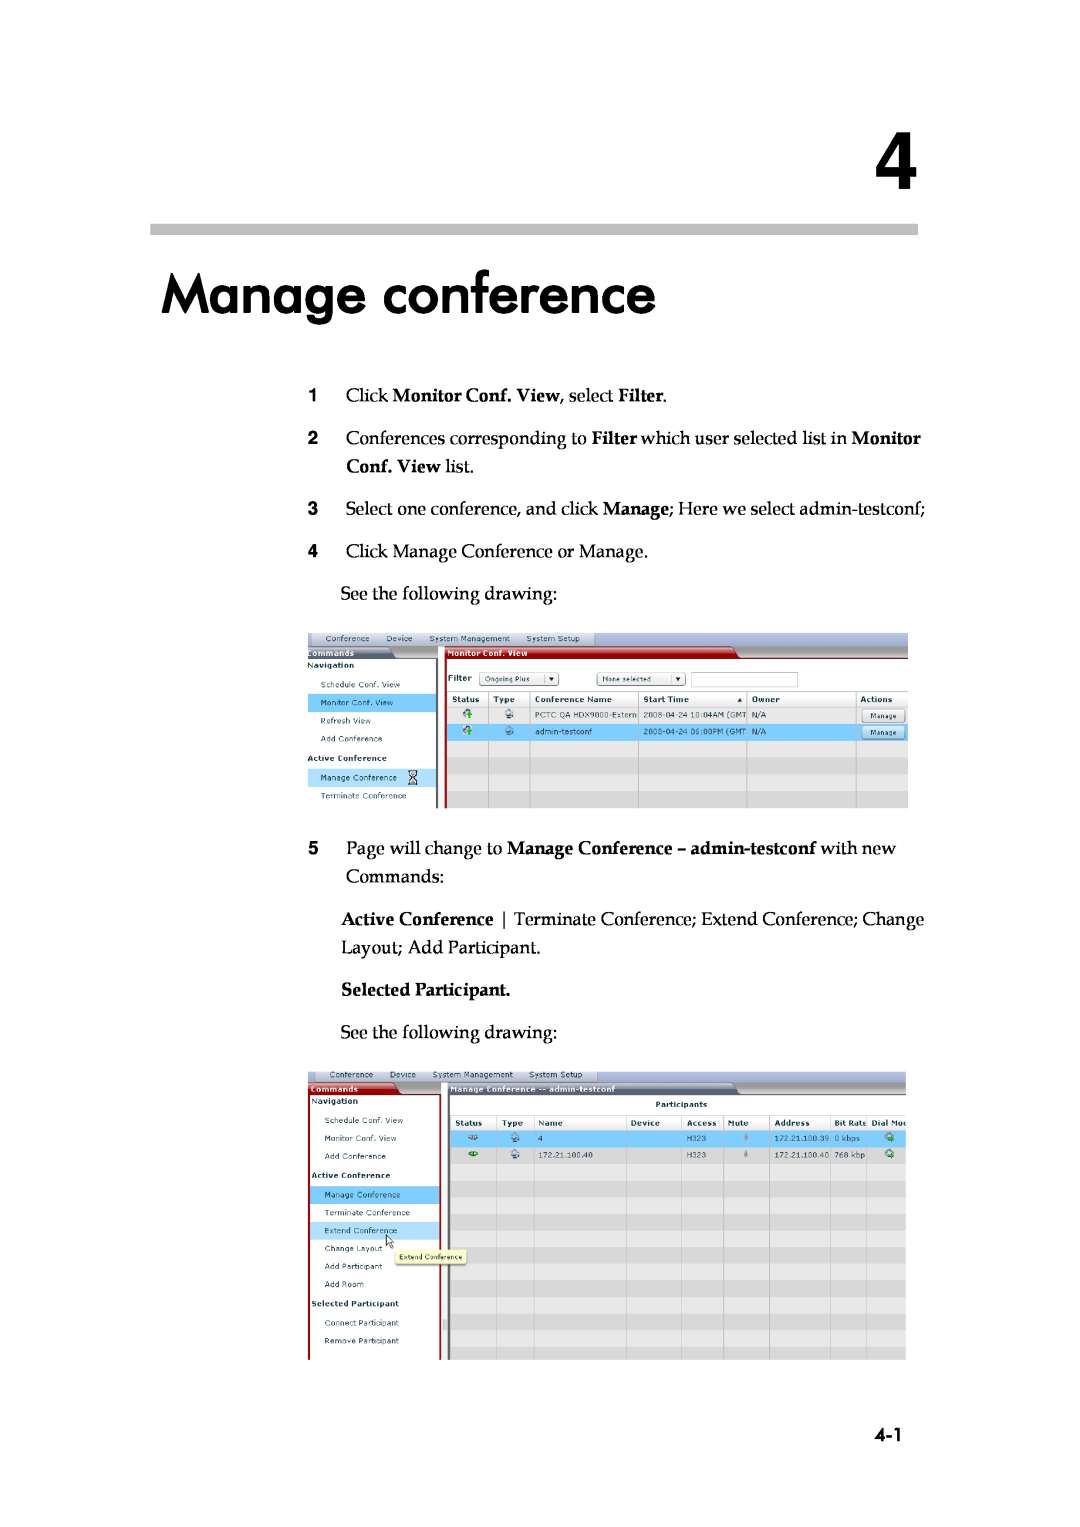 Polycom RMX 1000 V1.1.1 manual Manage conference, Click Monitor Conf. View, select Filter, Selected Participant 